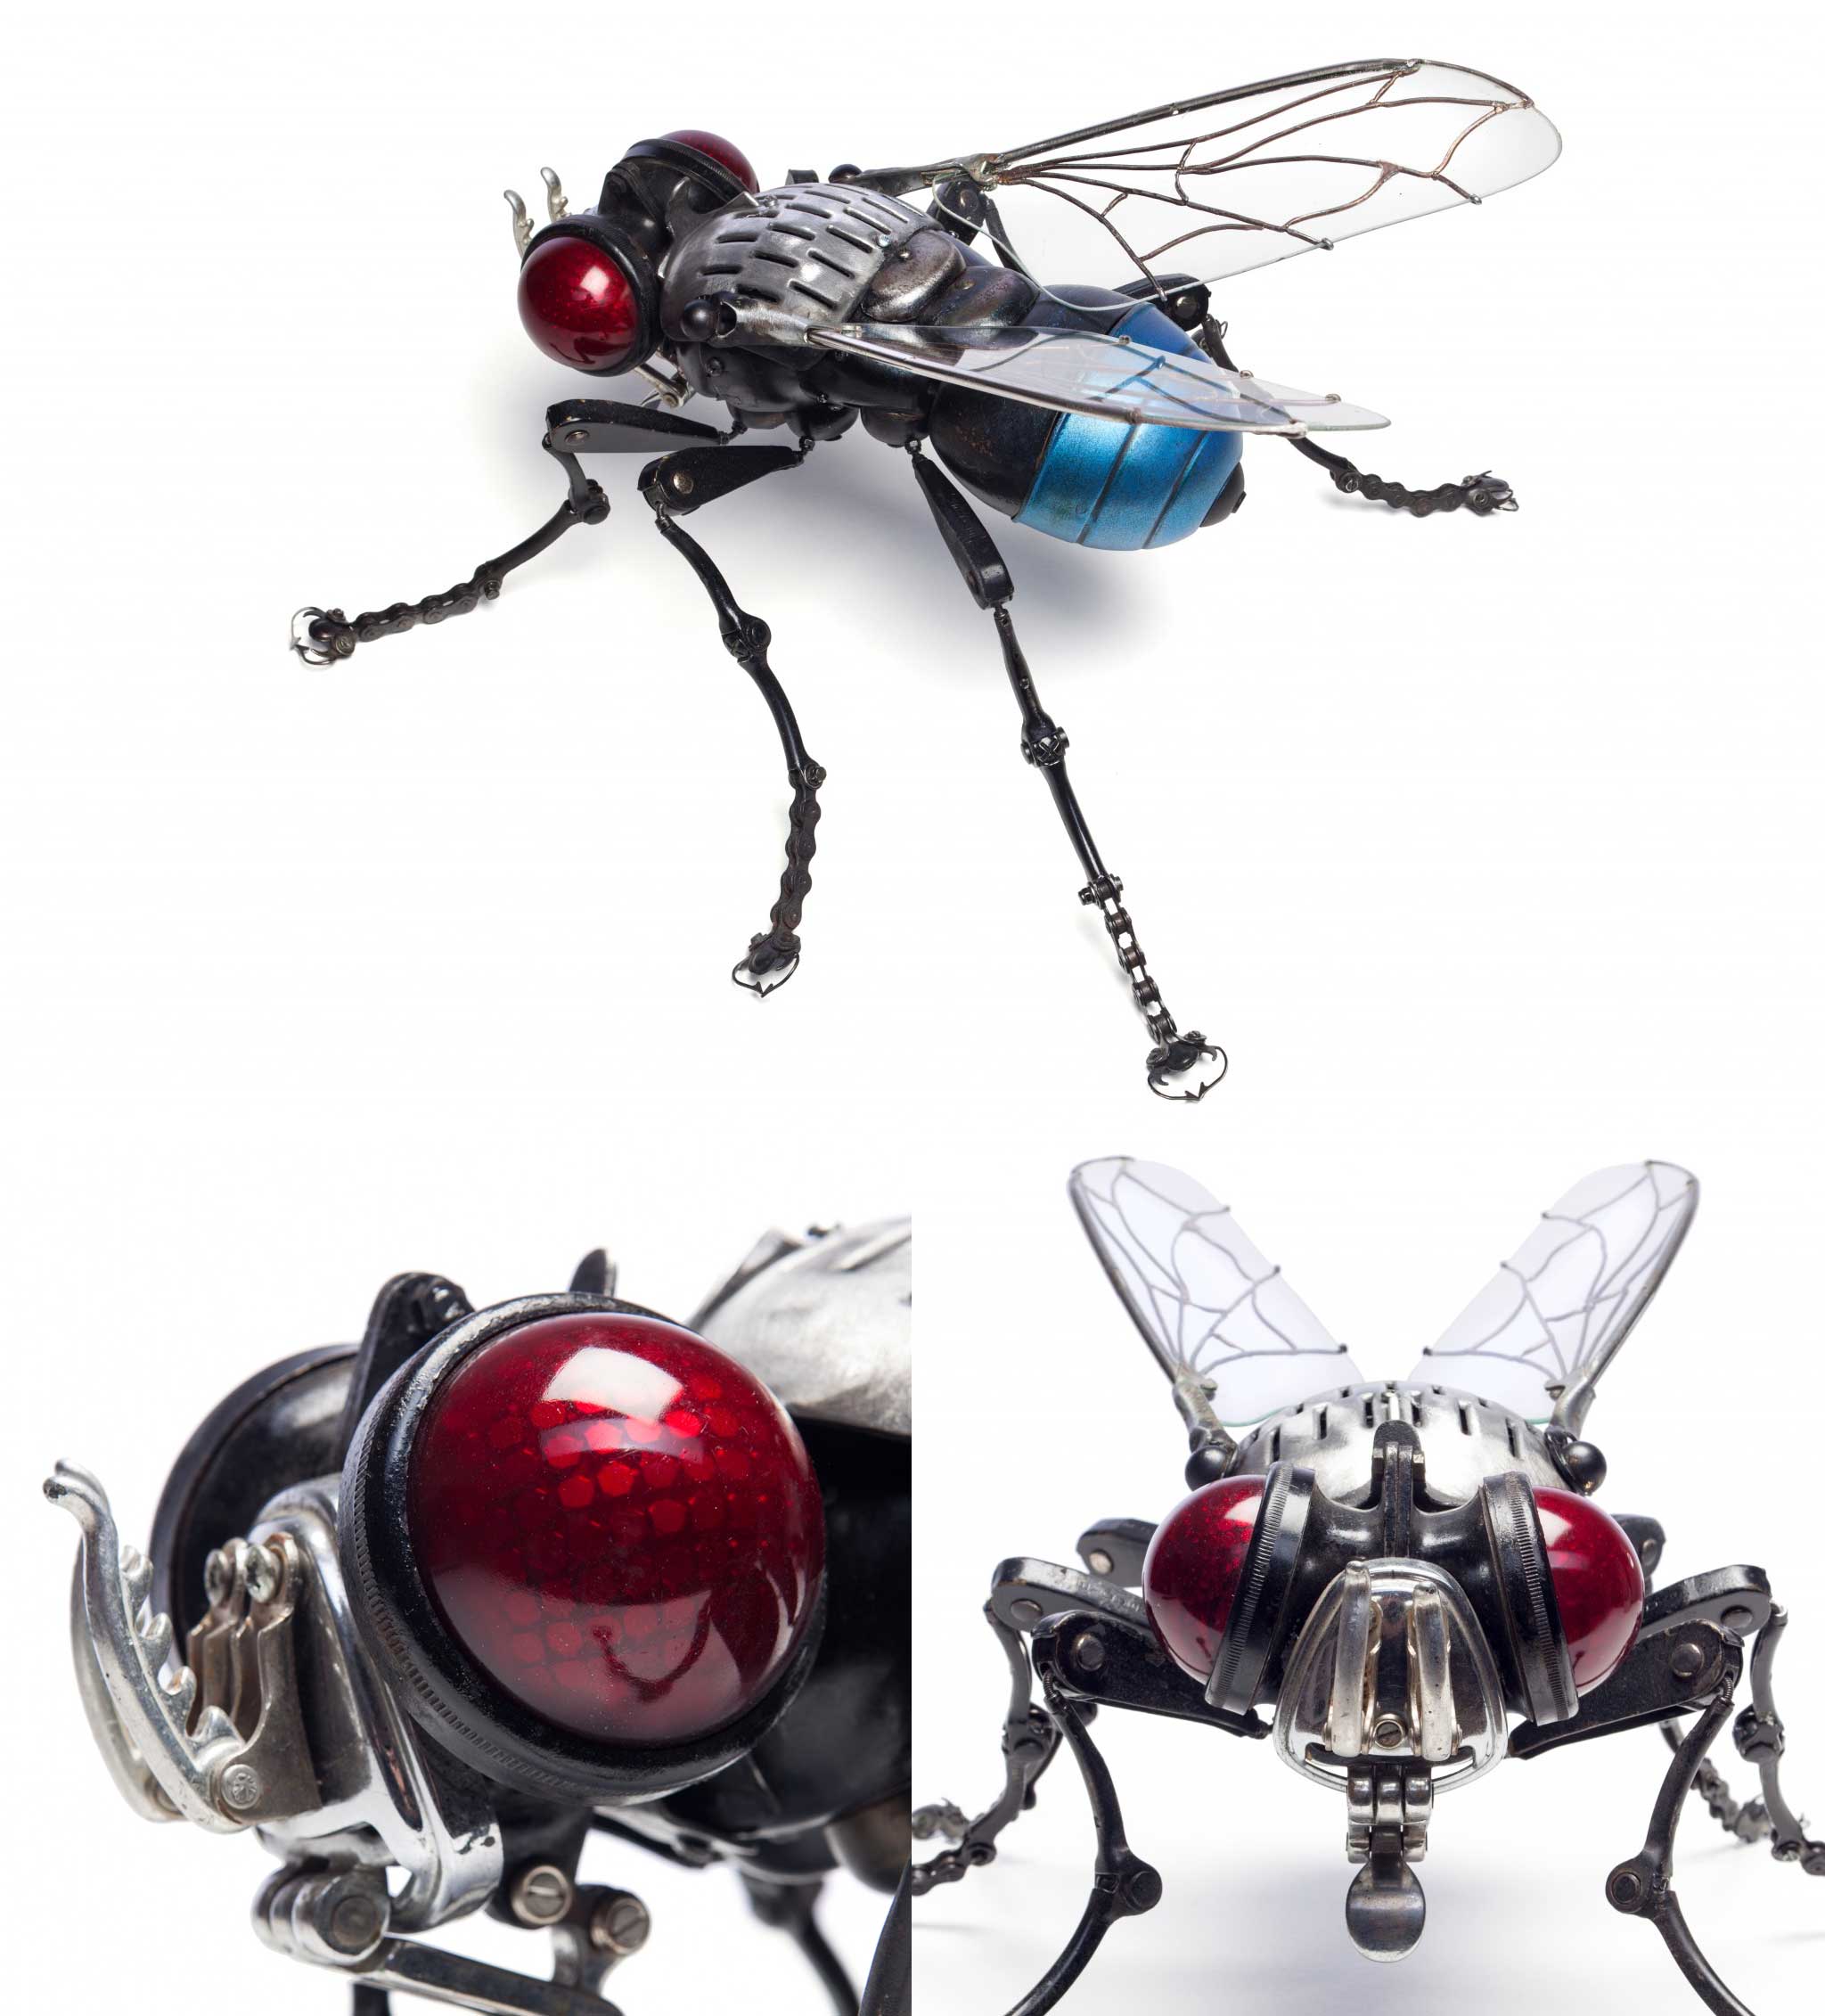 "Fly" 2016, Edouard Martinent. Legs: wiper arm, bicycle brakes, bicycle chains, typewriter parts. Head: motor vehicle rear lights. Trunk: car trunk hinge. Antennas: ski boot clasps. Thorax: motorcycle headlight, 50s kitchen utensil. Wings: glass, wiper, solder lead. Abdomen: motorcycle headlight, ceiling light part.